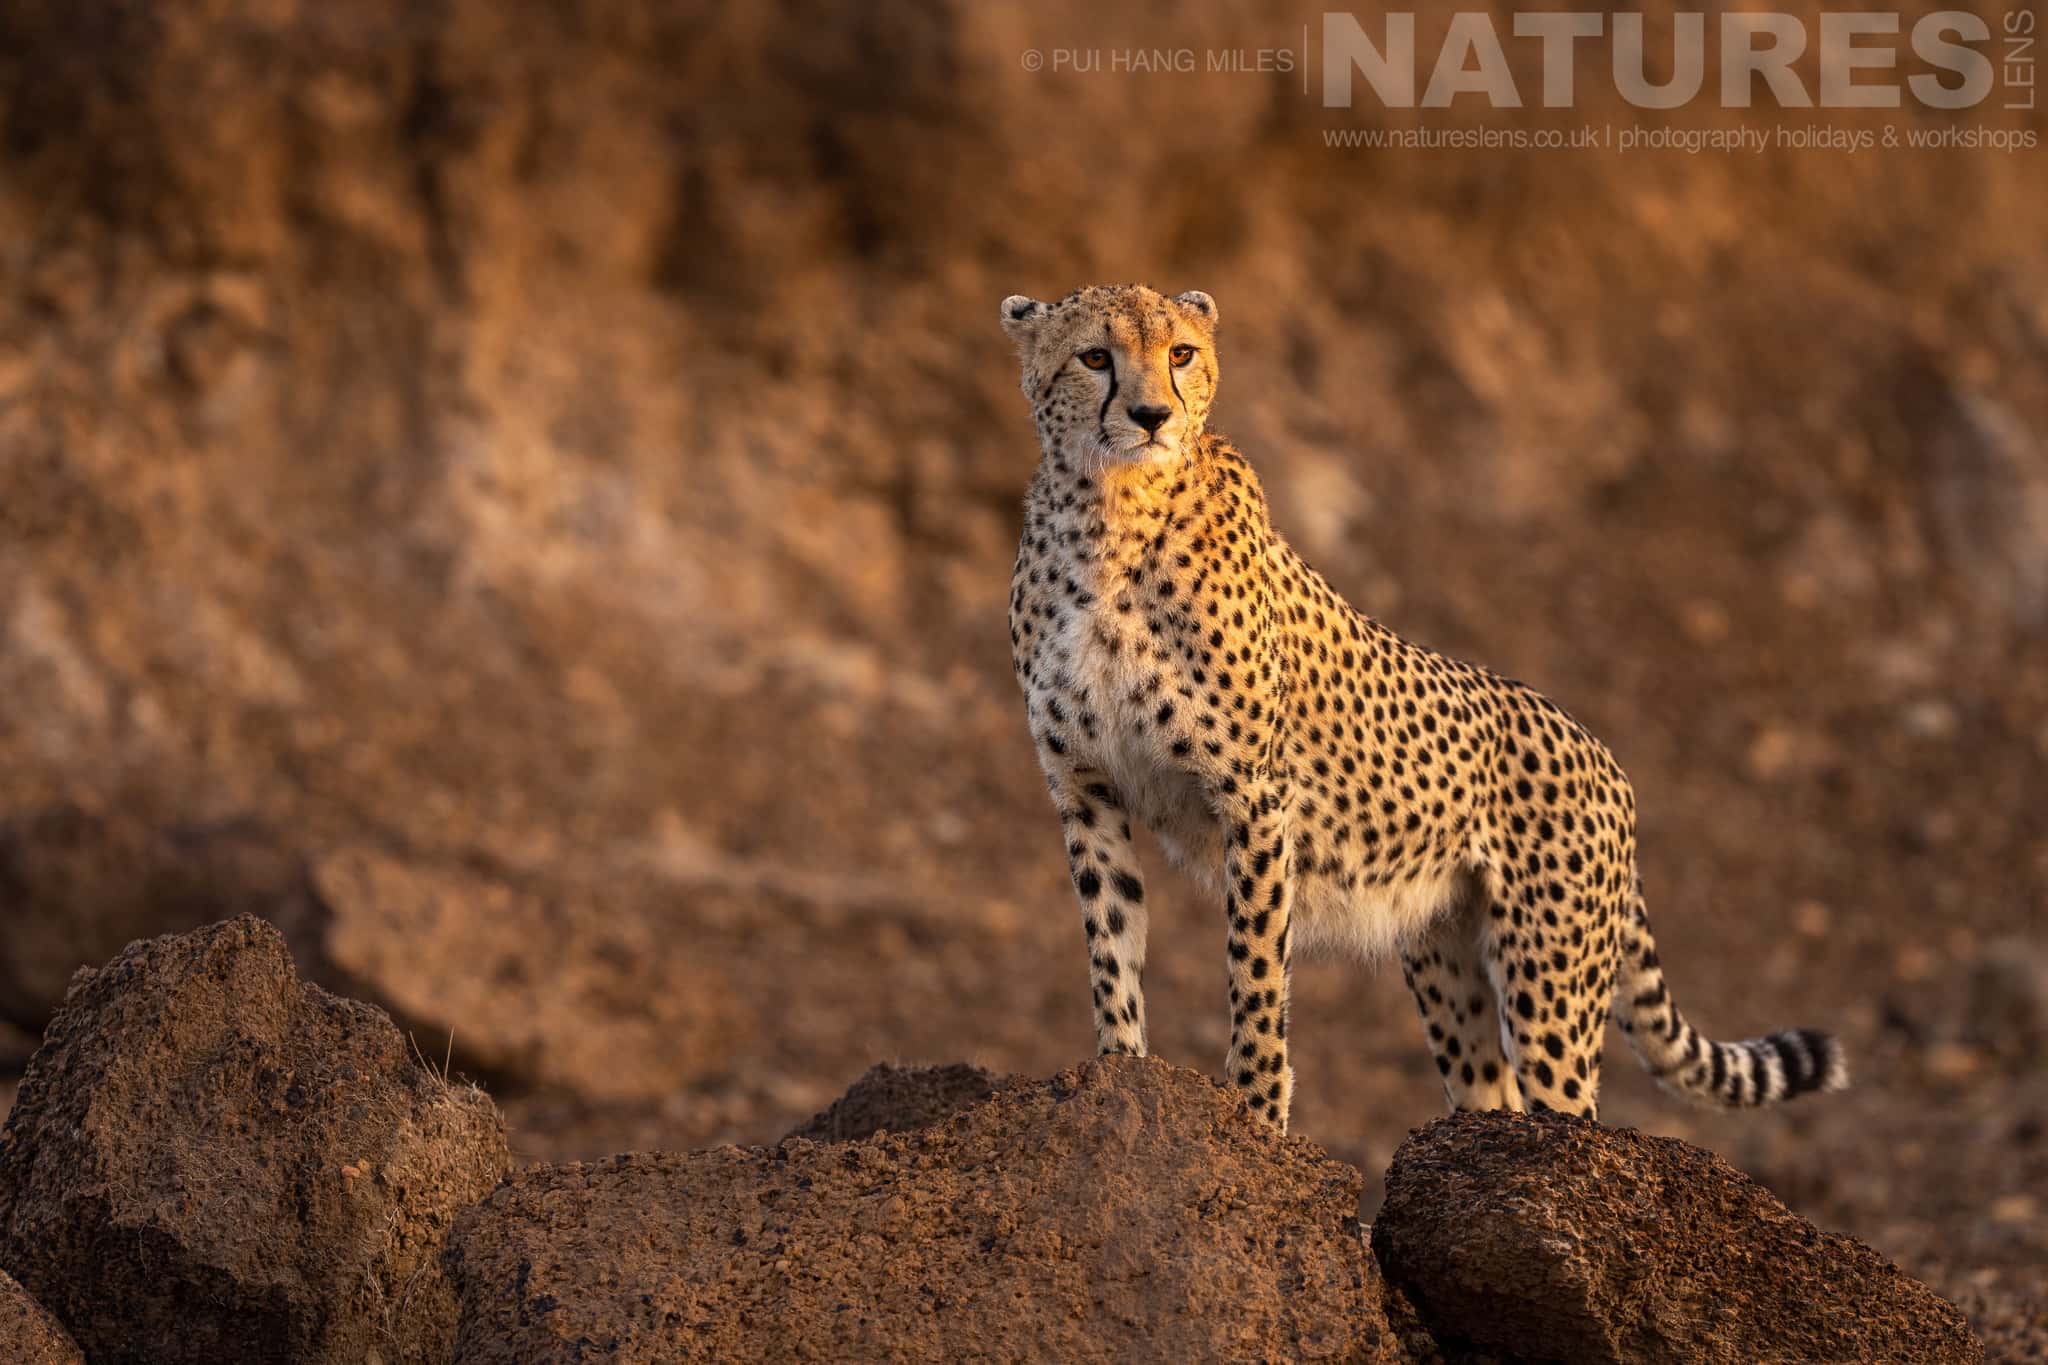 One Of The Mara Cheetahs On An Escarpment photographed at the locations used for the Ultimate African Wildlife photography holiday